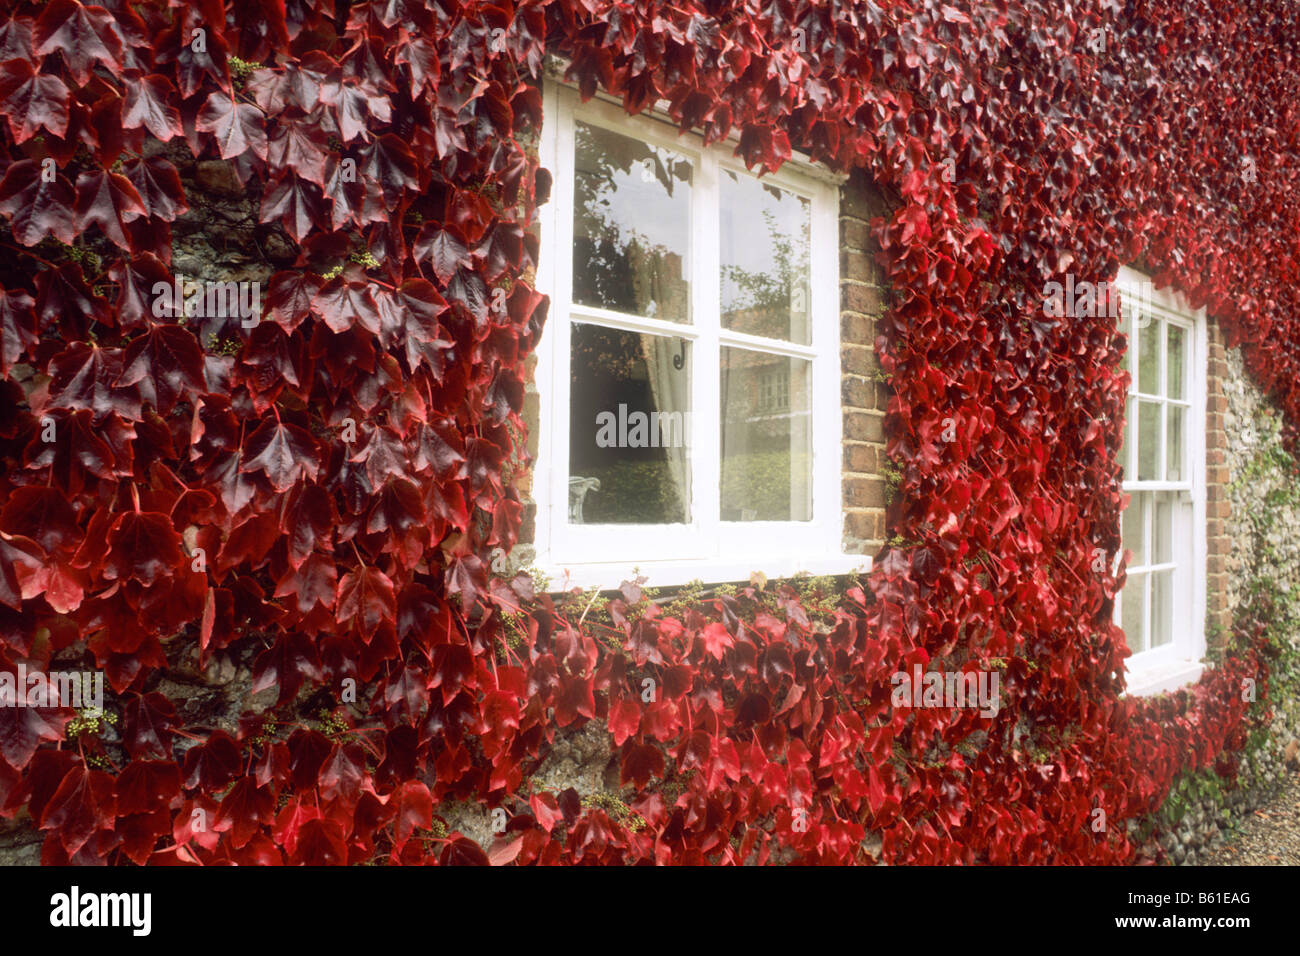 Parthenocissus tricuspidata house window red scarlet leaf leaves Autumn foliage Autumnal growing on wall Virginia Creeper garden Stock Photo